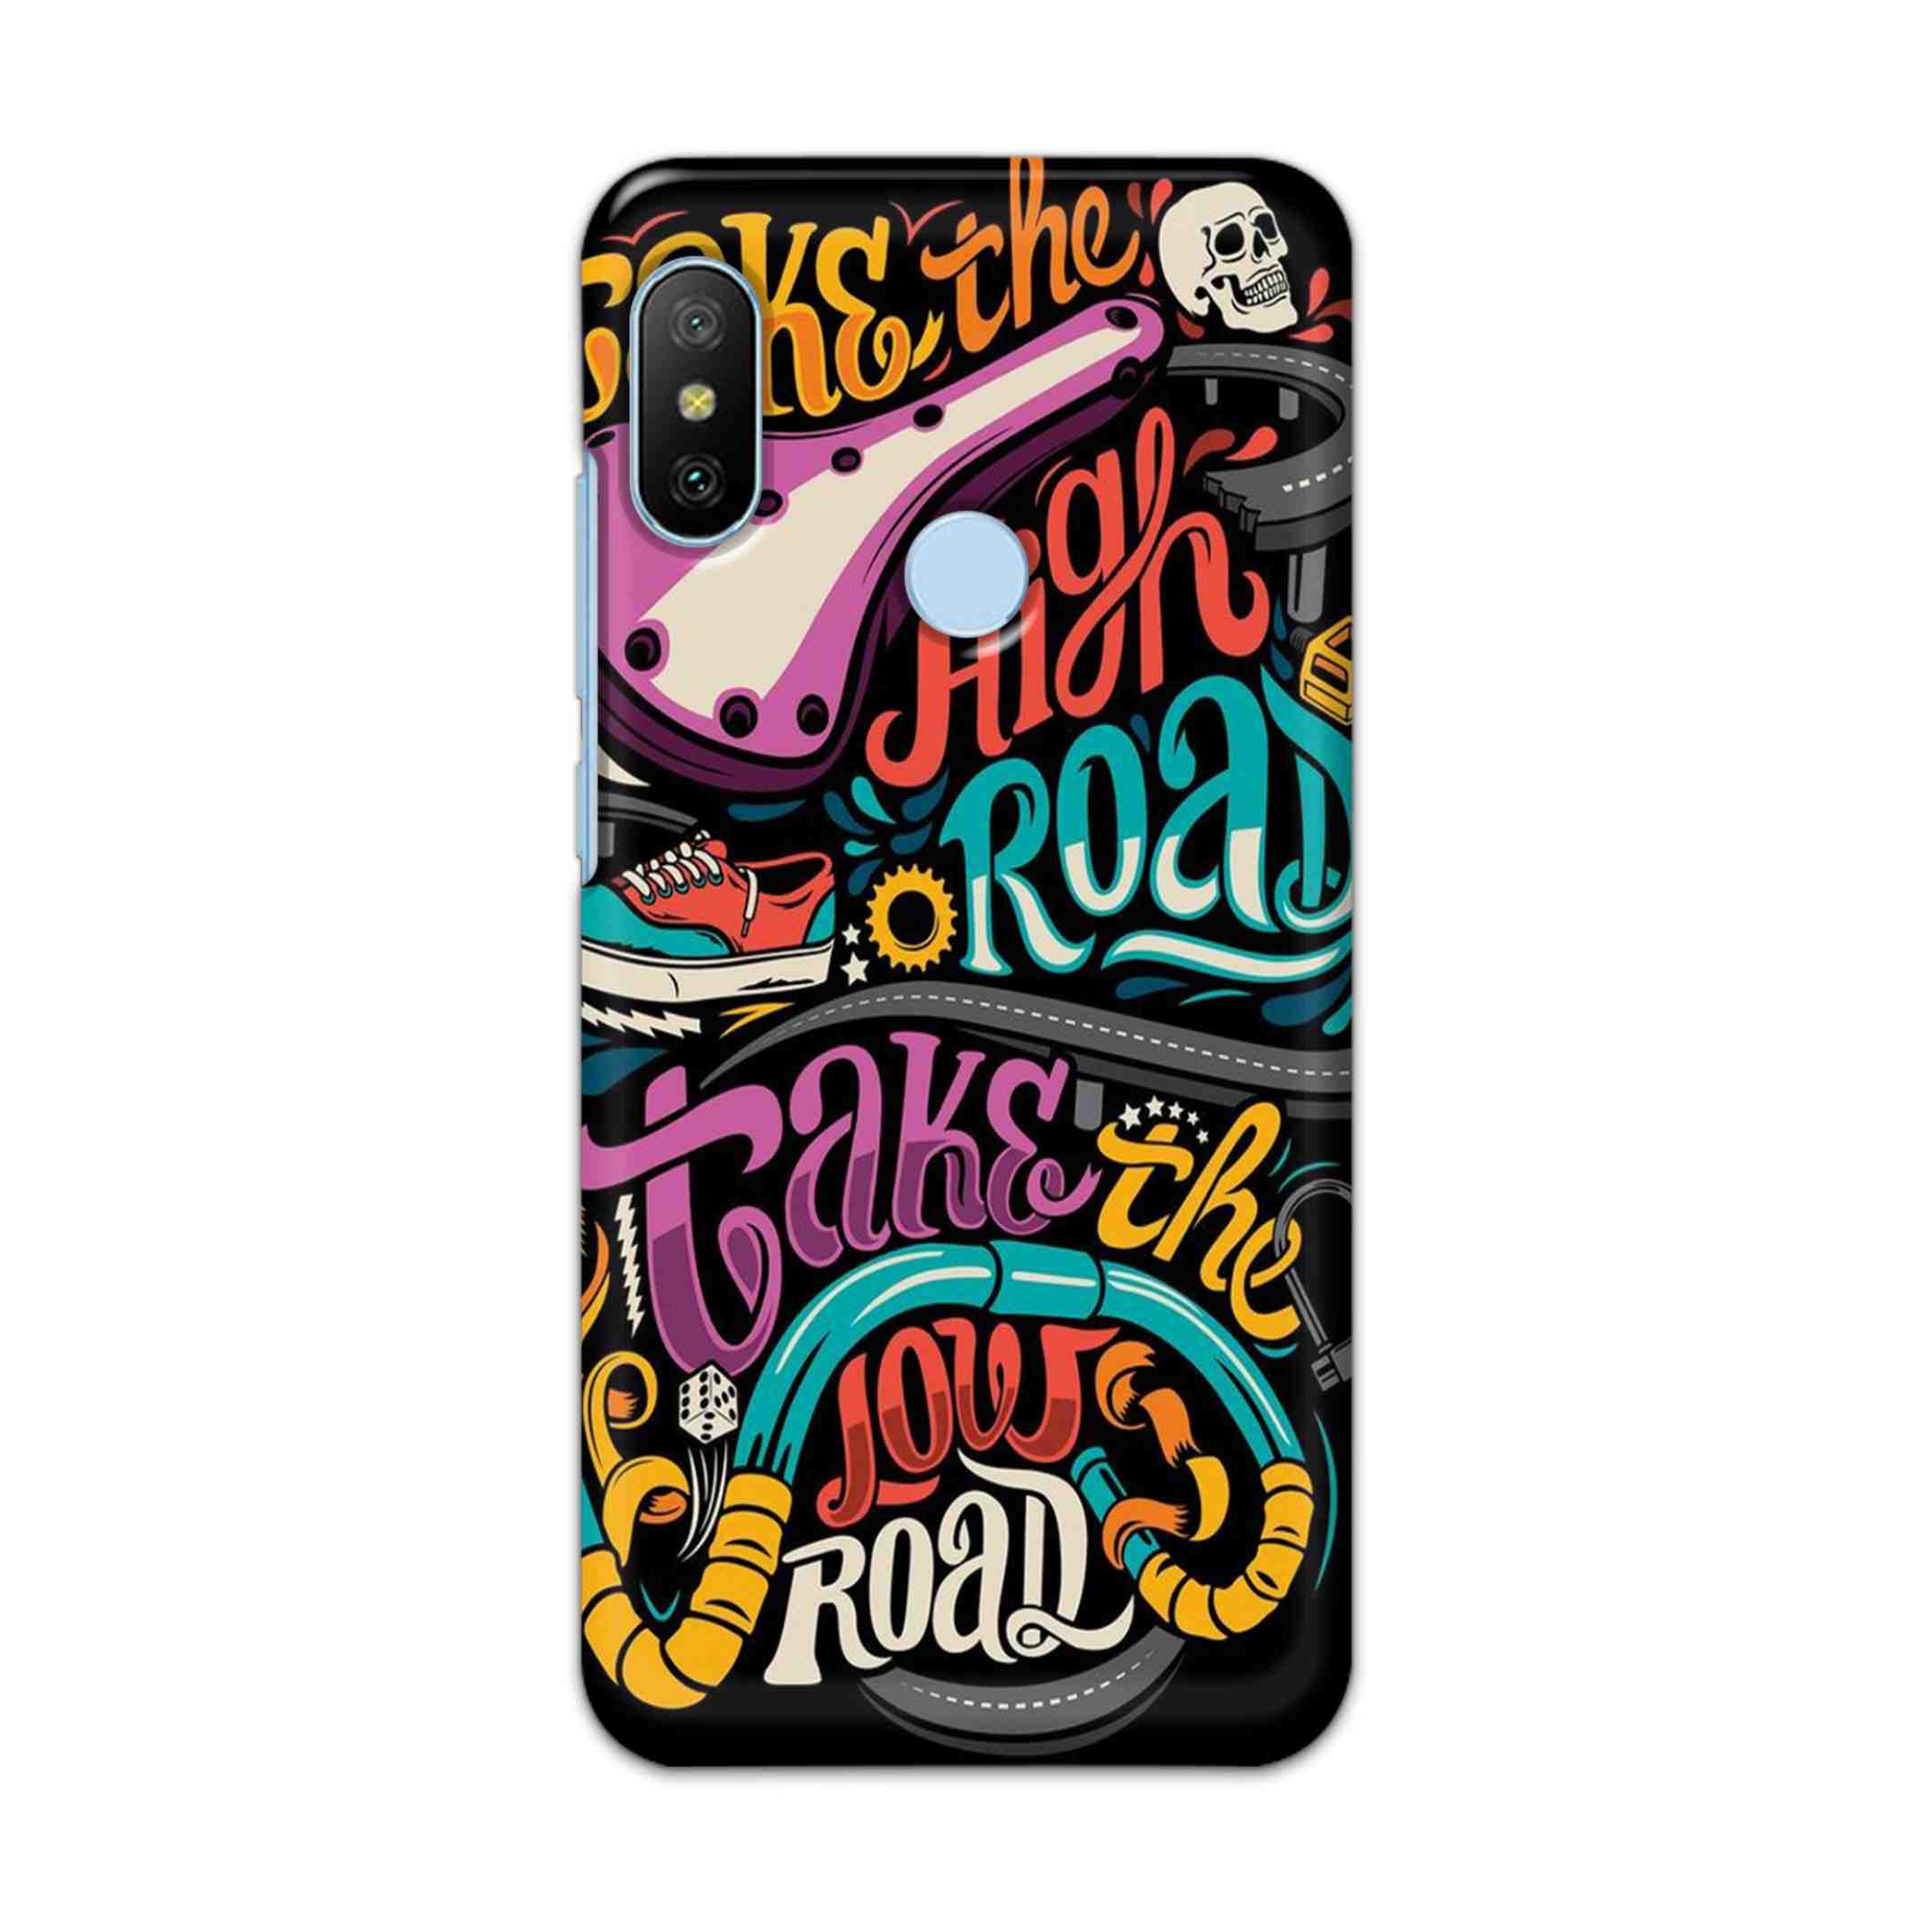 Buy Take The High Road Hard Back Mobile Phone Case/Cover For Xiaomi Redmi 6 Pro Online